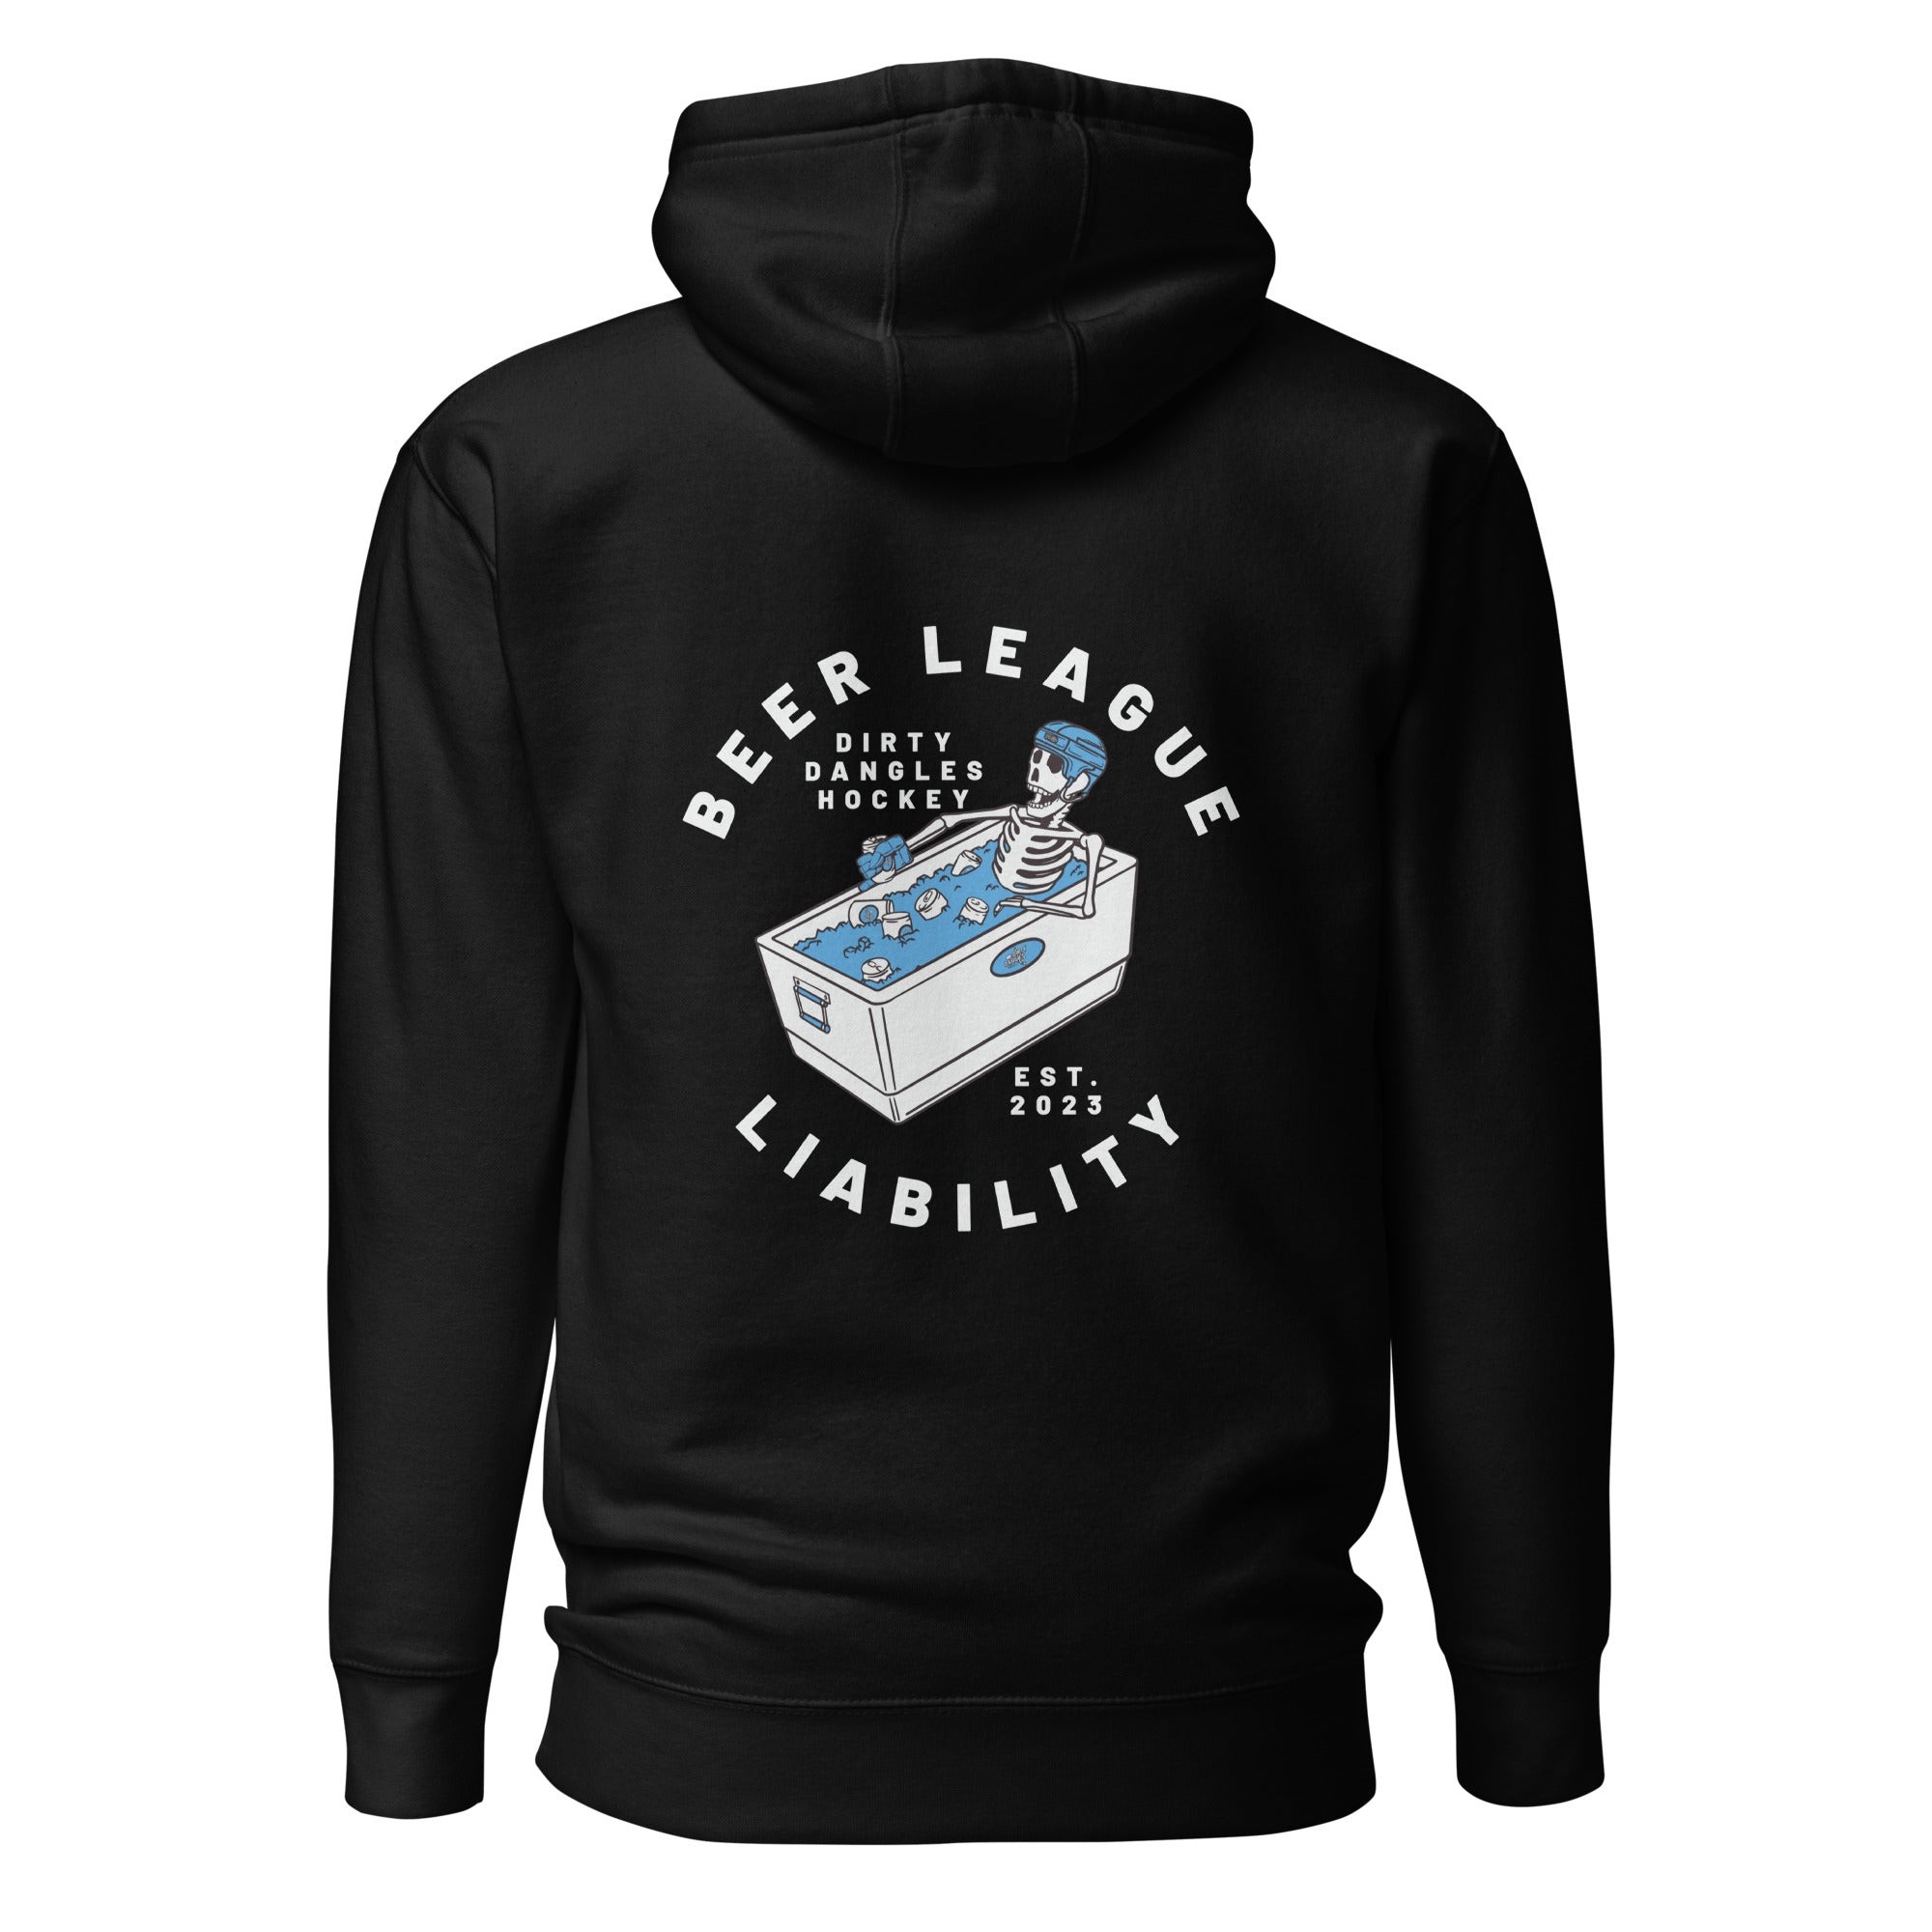 the back of a black pullover hoodie sweatshirt with a skeleton drinking a beer while sitting in a cooler of ice. beer league liability dirty dangles hockey est 2023. white background